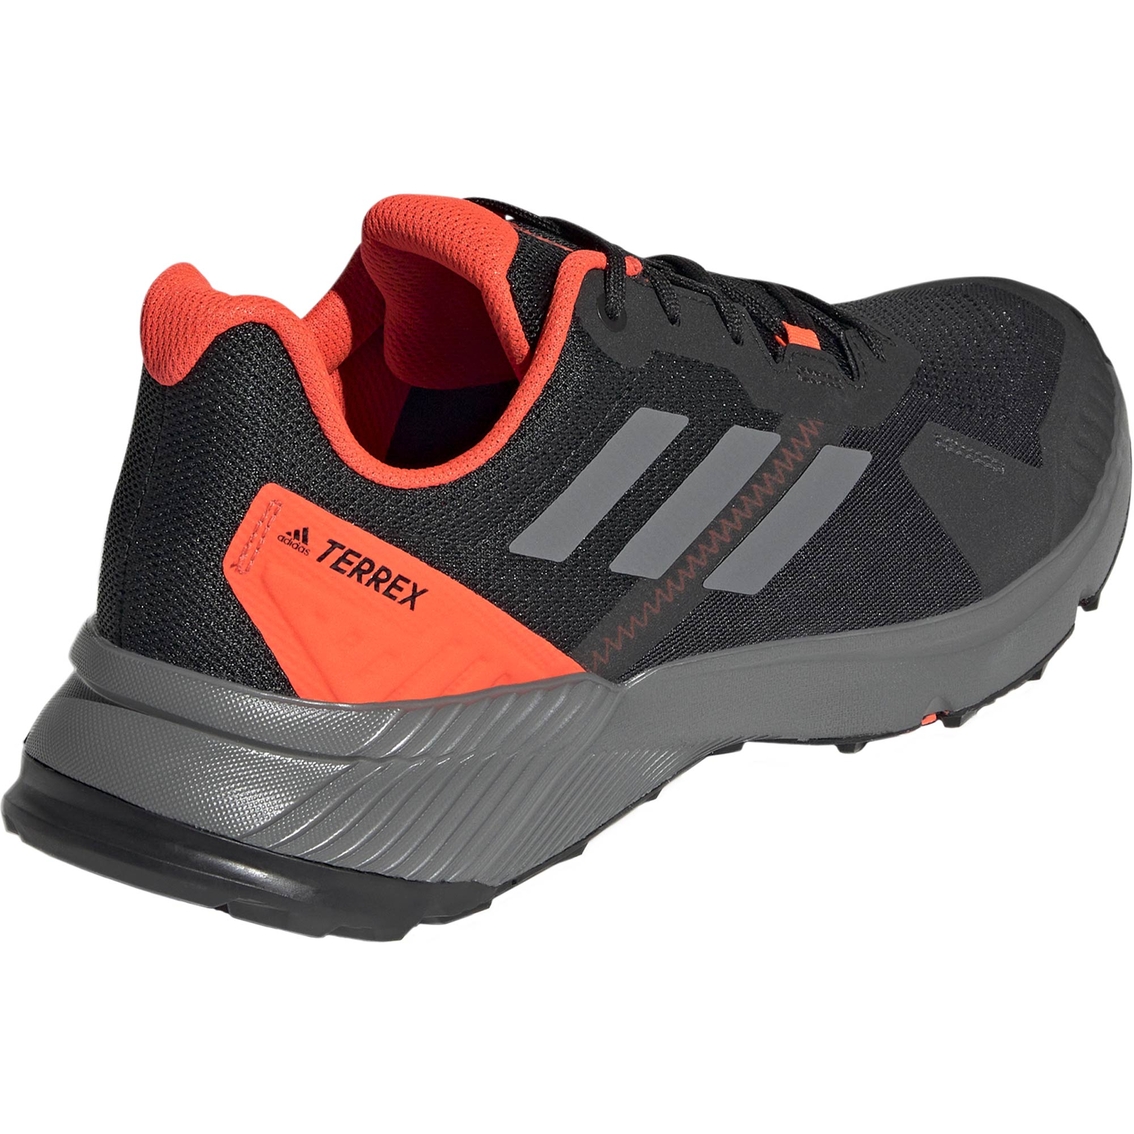 Adidas Terrex Soulstride Trail Running Shoes - Image 4 of 8